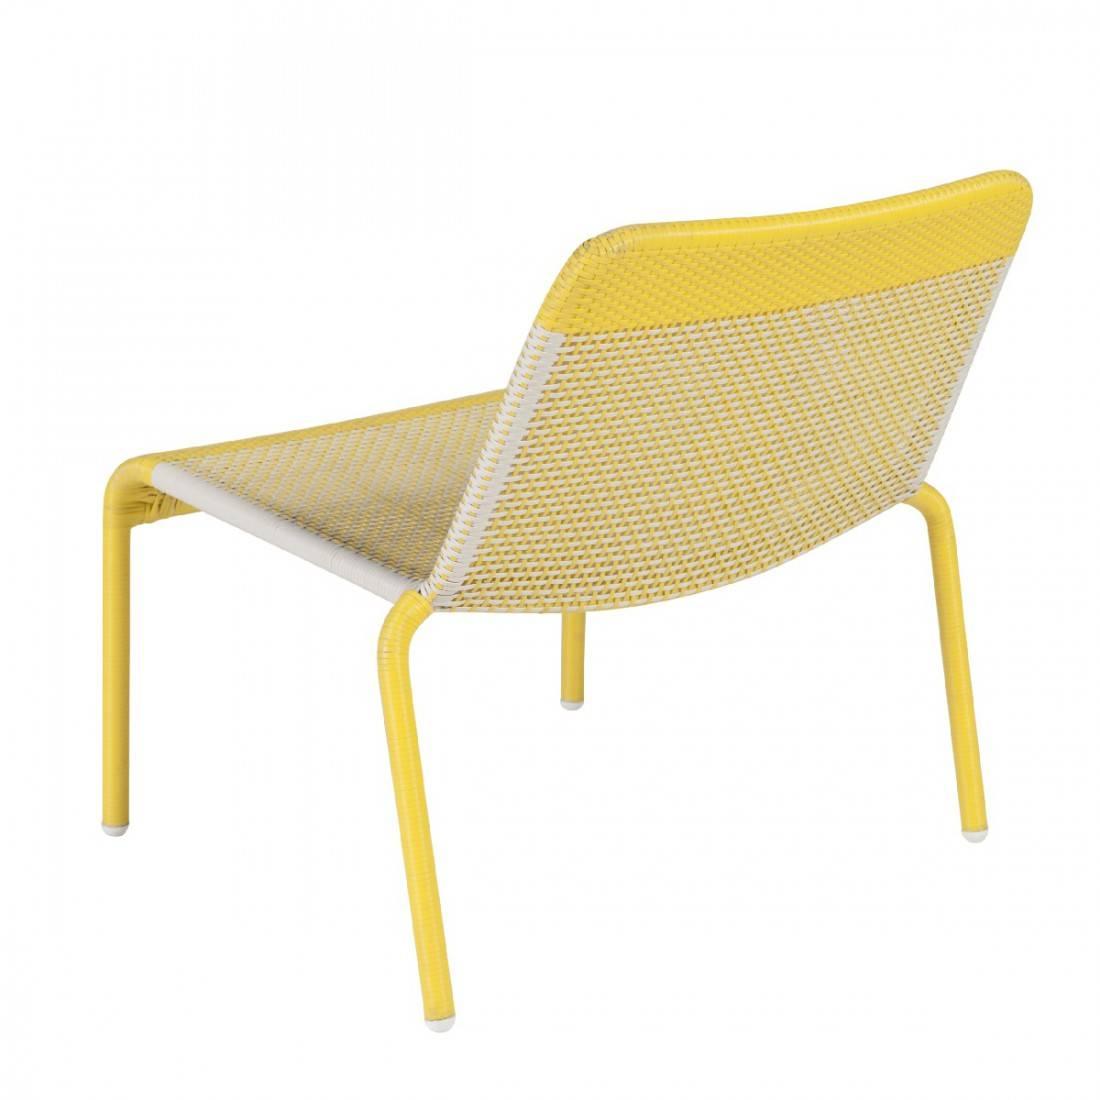 Pair of yellow braided resin lounge armchairs indoor/outdoor. They will be perfect on your terrace, in your veranda, your winter garden, even around the swimming pool! French design and Retro style, practical (stackable!) Never used.